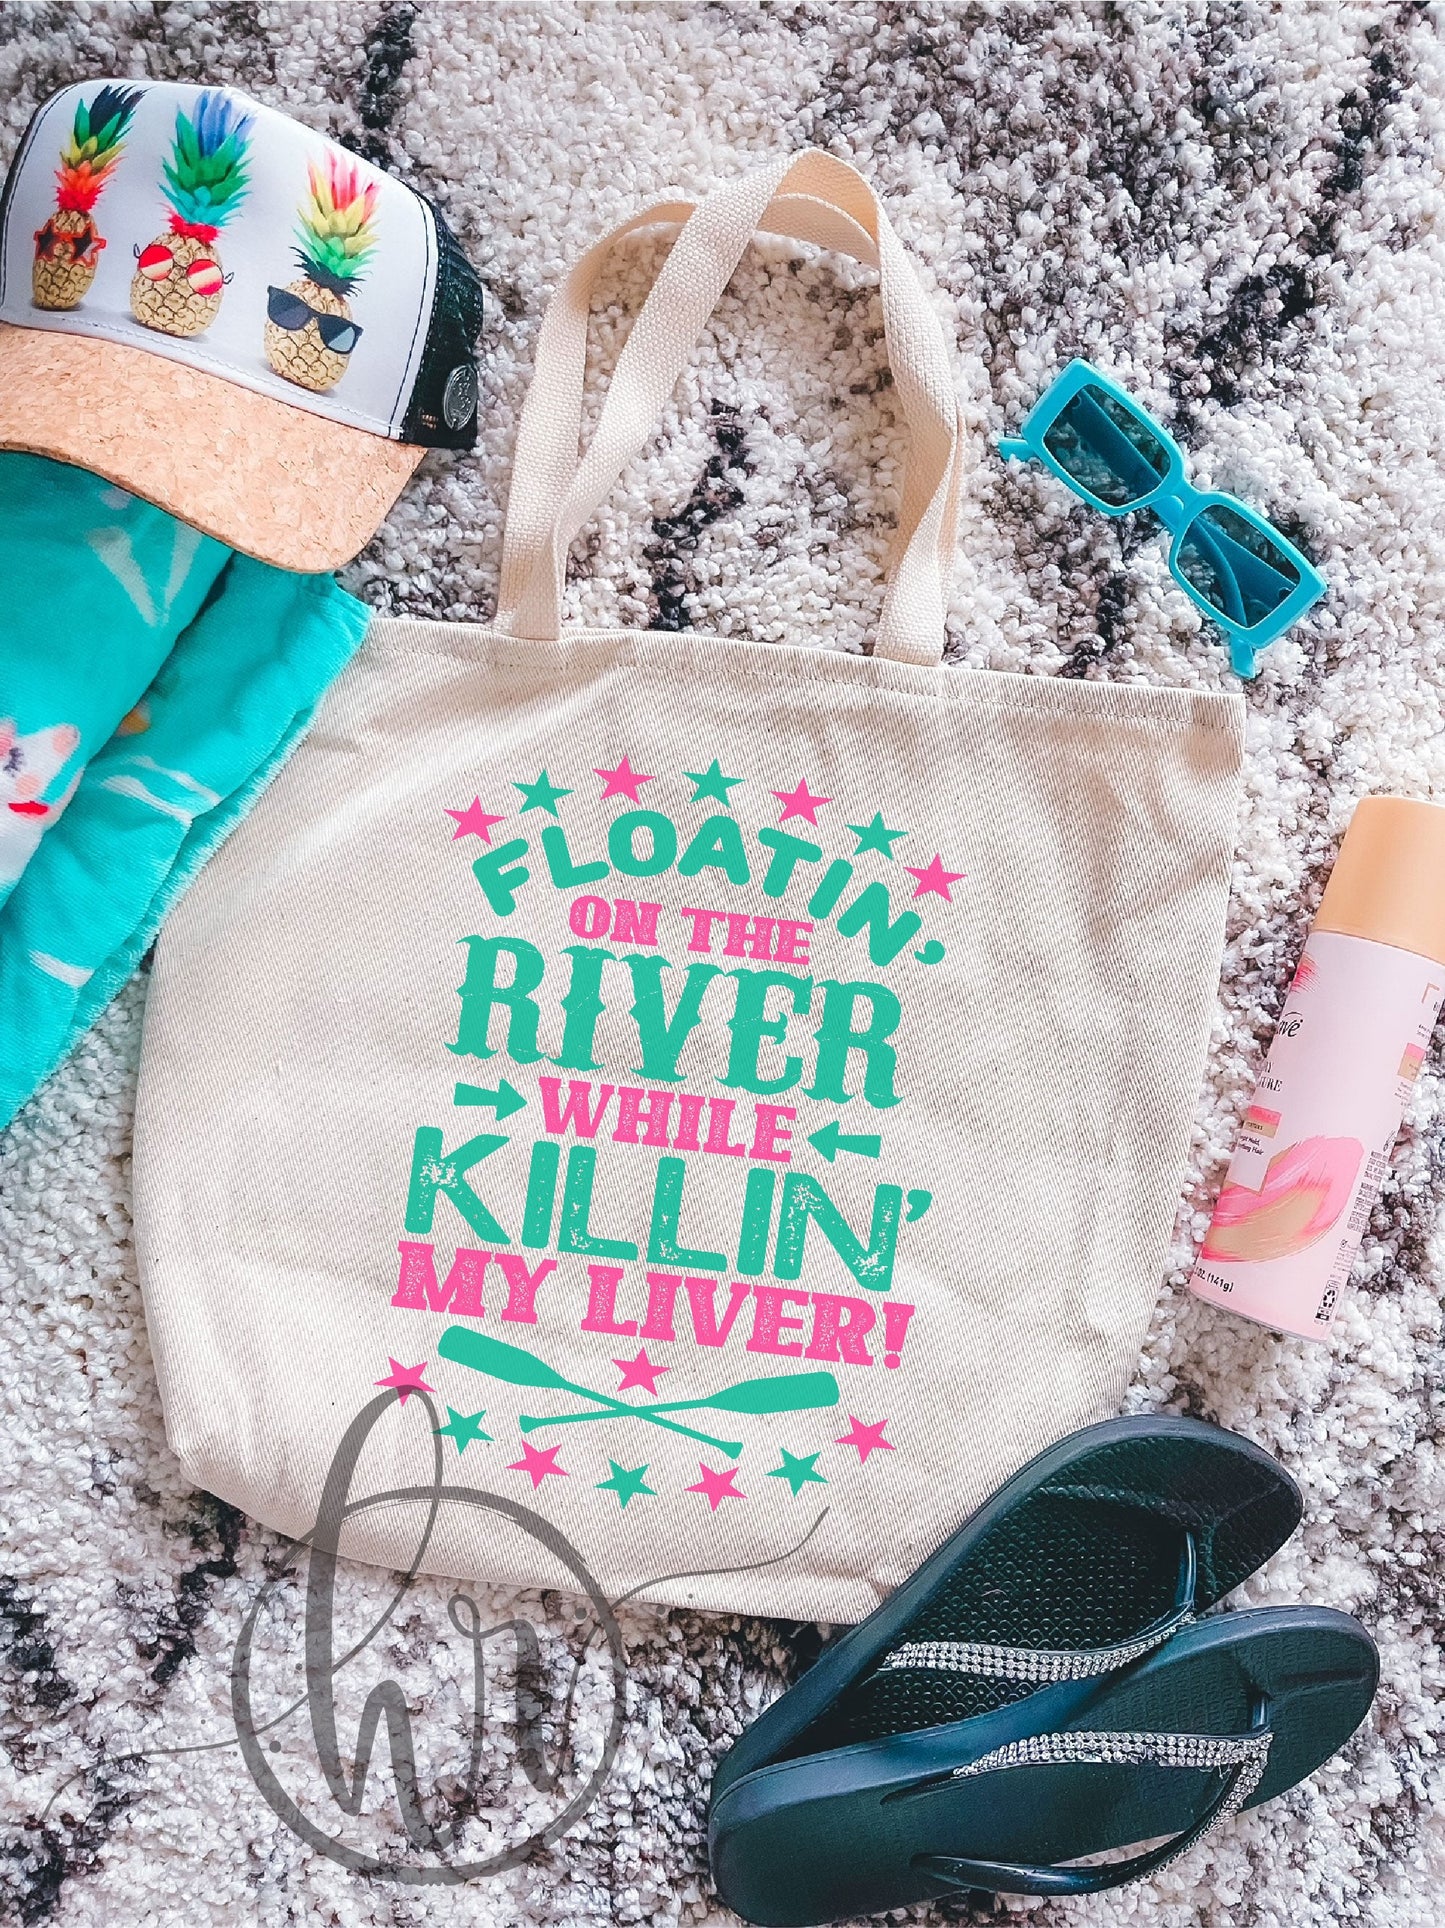 Floatin' The River While Killin' My Liver! Tote Bag